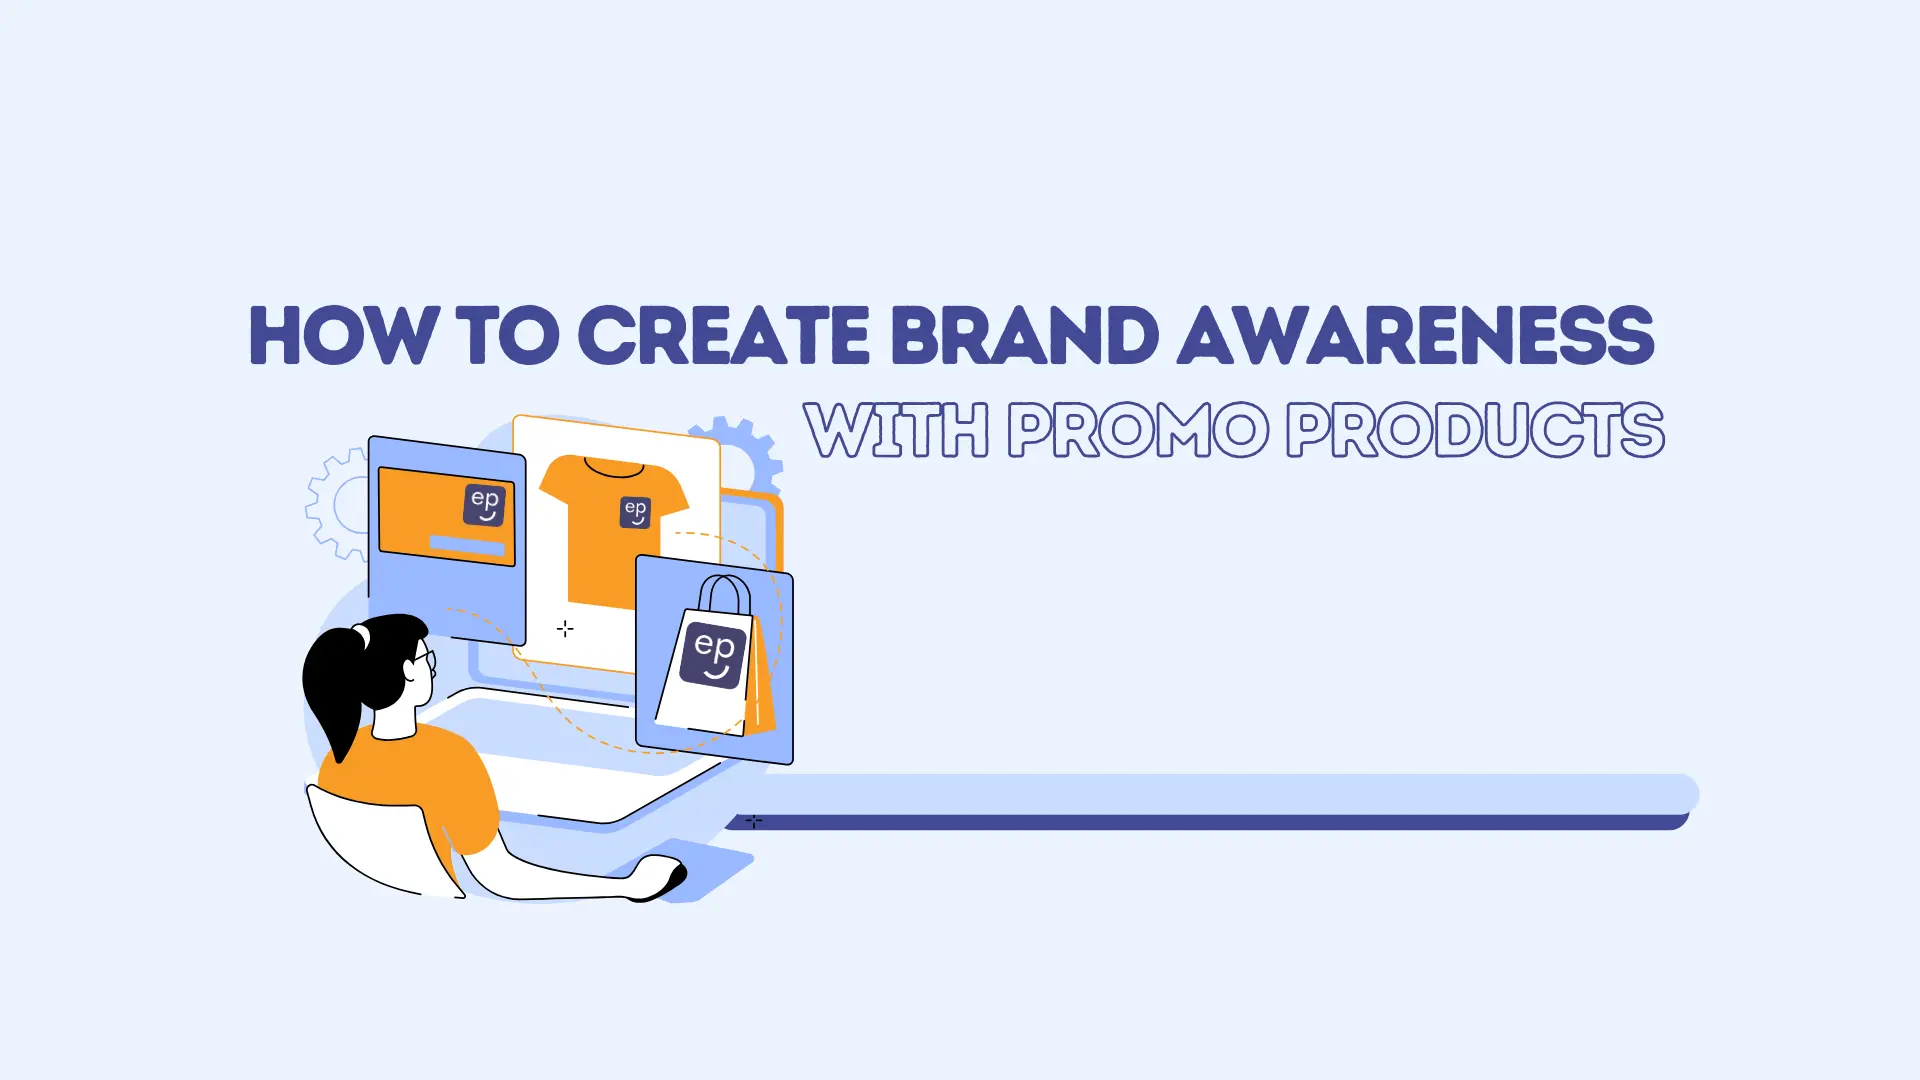 How to Increase Brand Awareness Using Promo Products